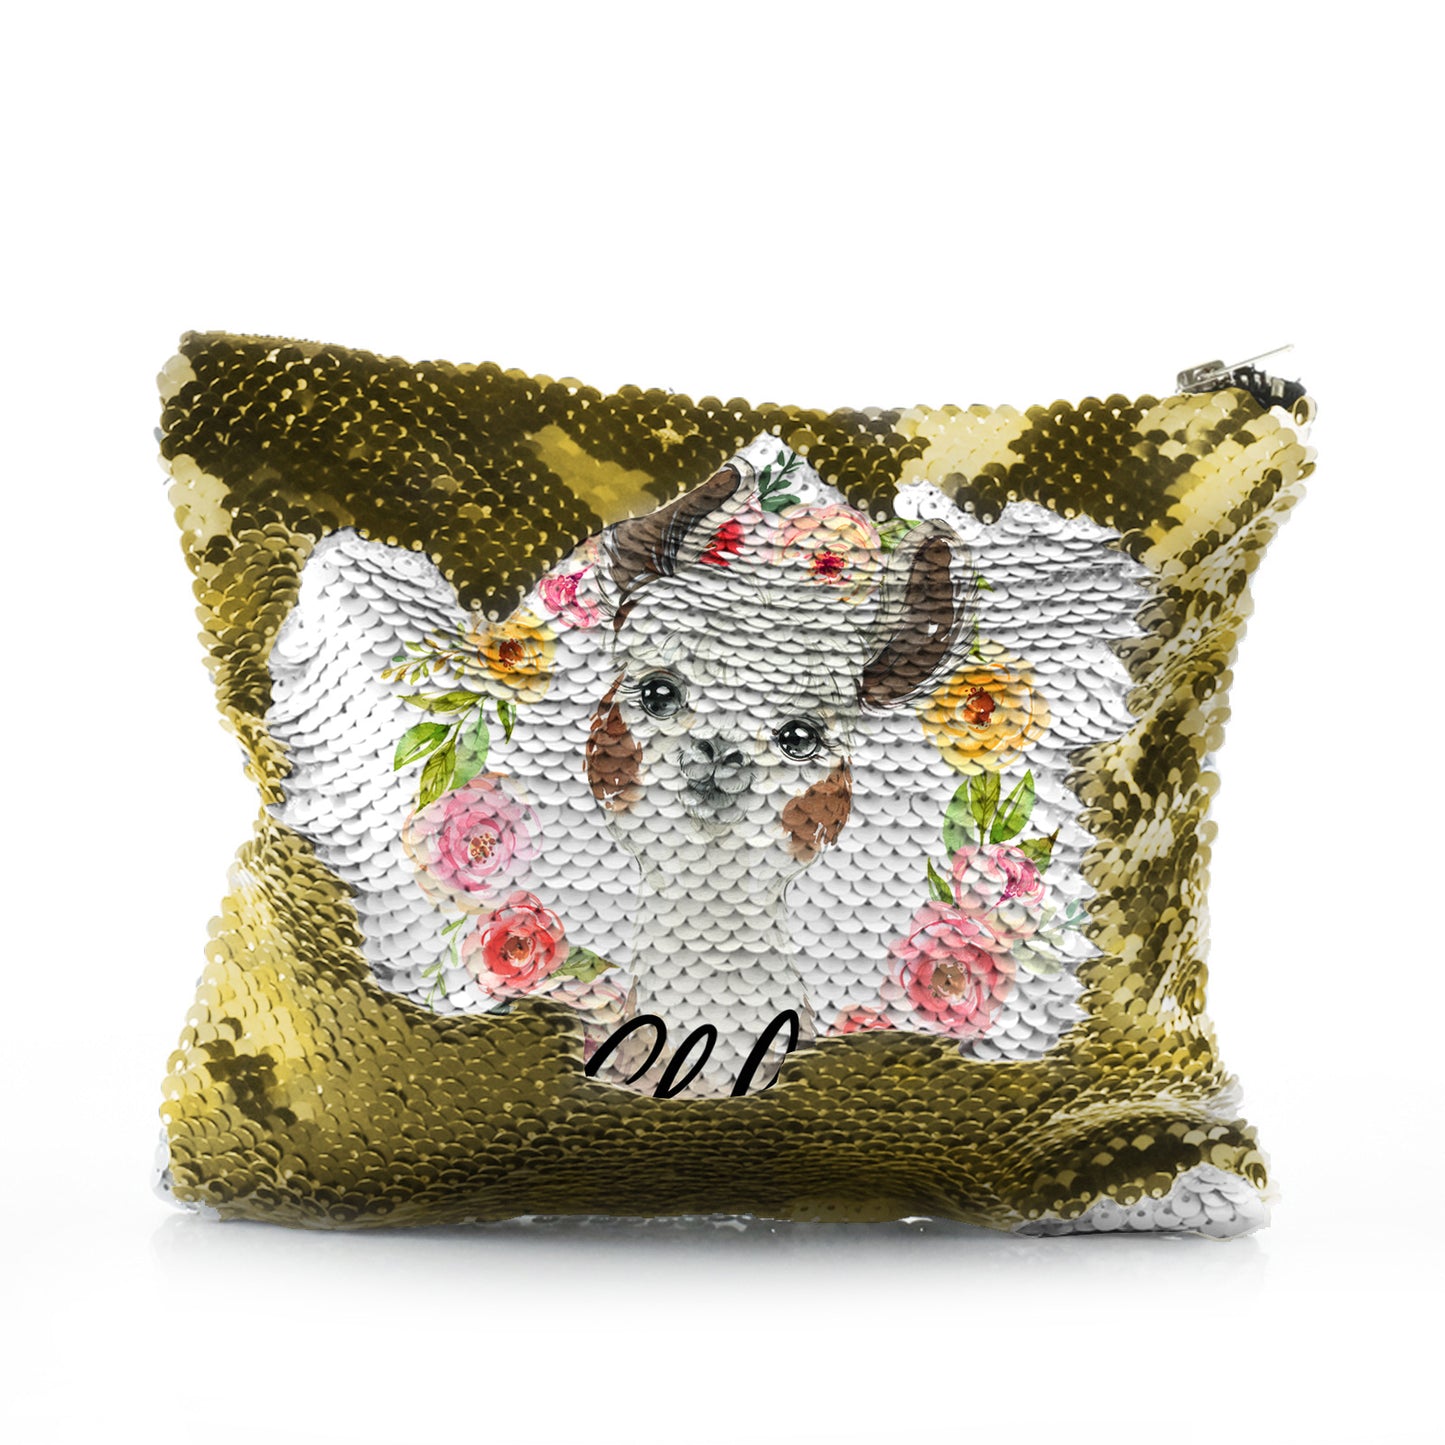 Personalised Sequin Zip Bag with Brown and White Alpaca Multicolour Flower Wreath and Cute Text